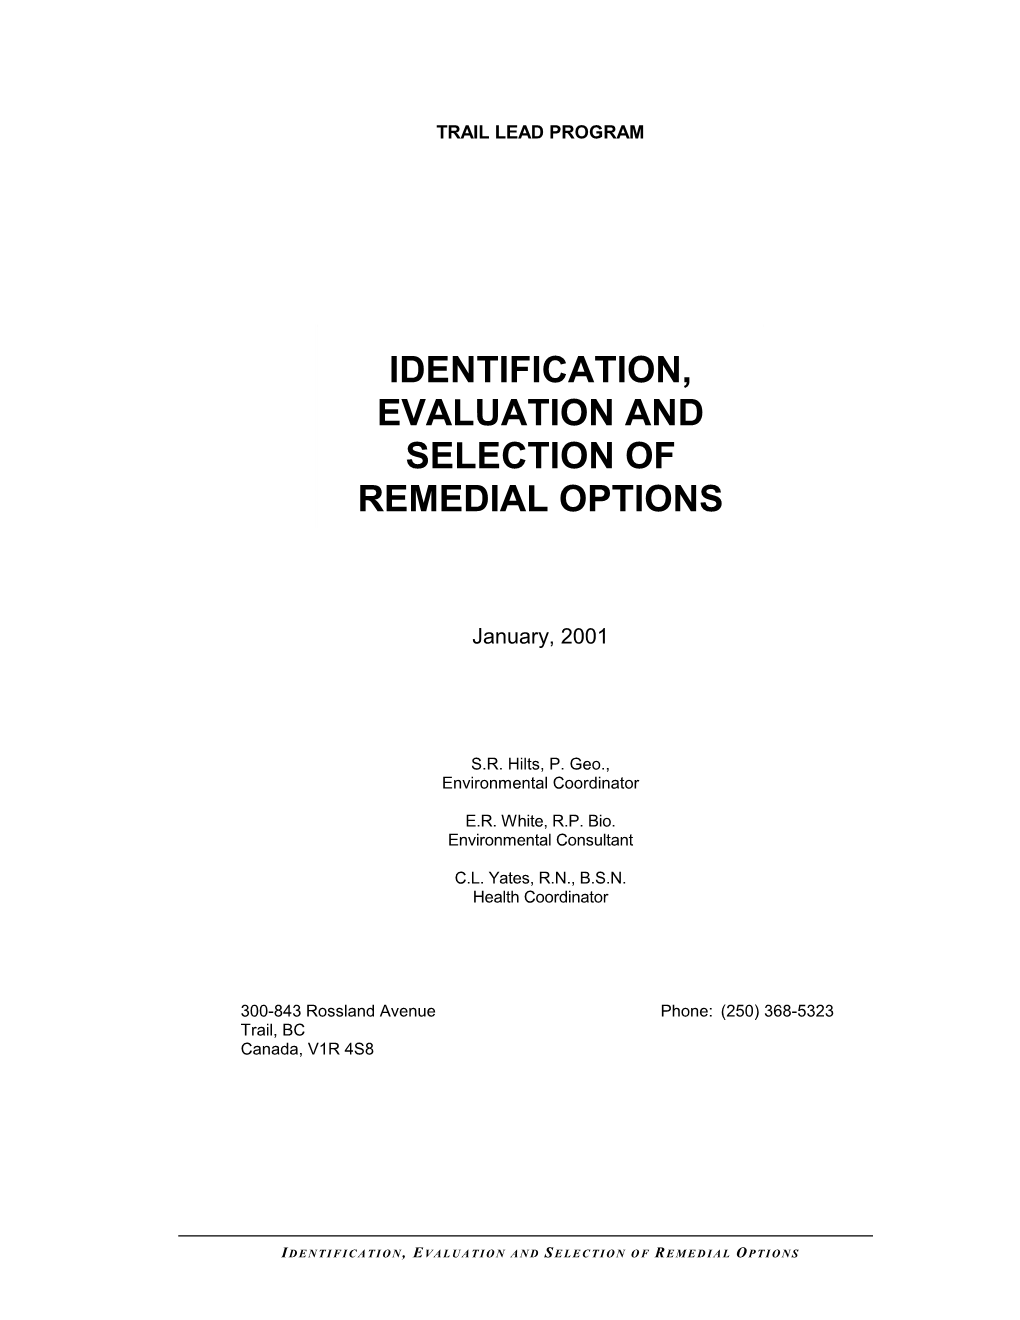 Remedial Options Report